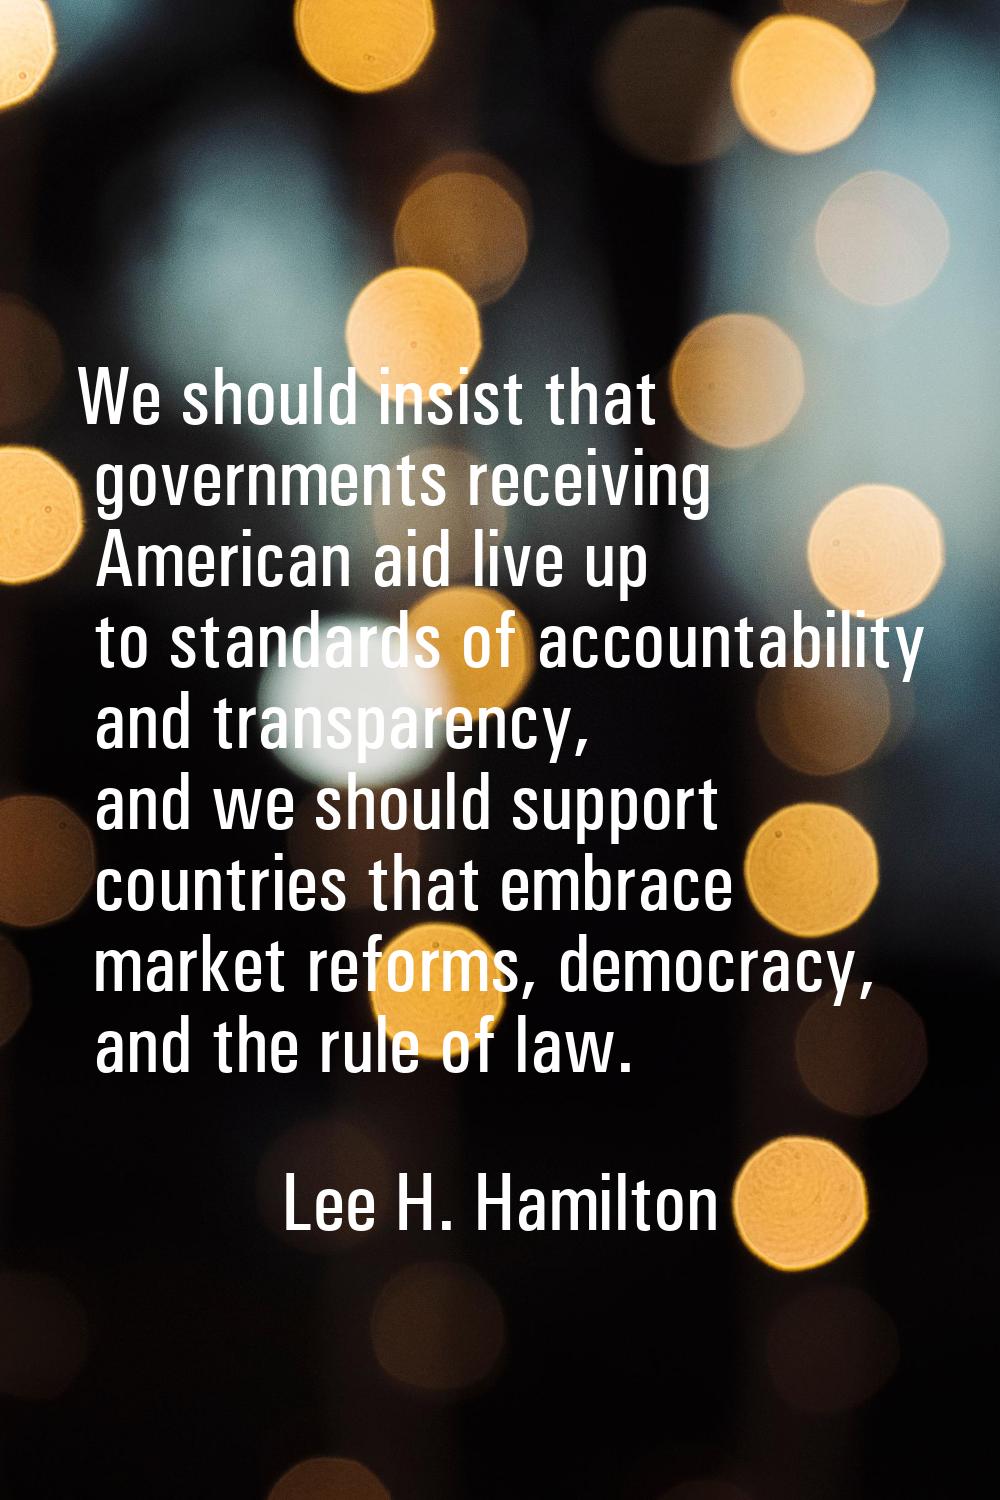 We should insist that governments receiving American aid live up to standards of accountability and